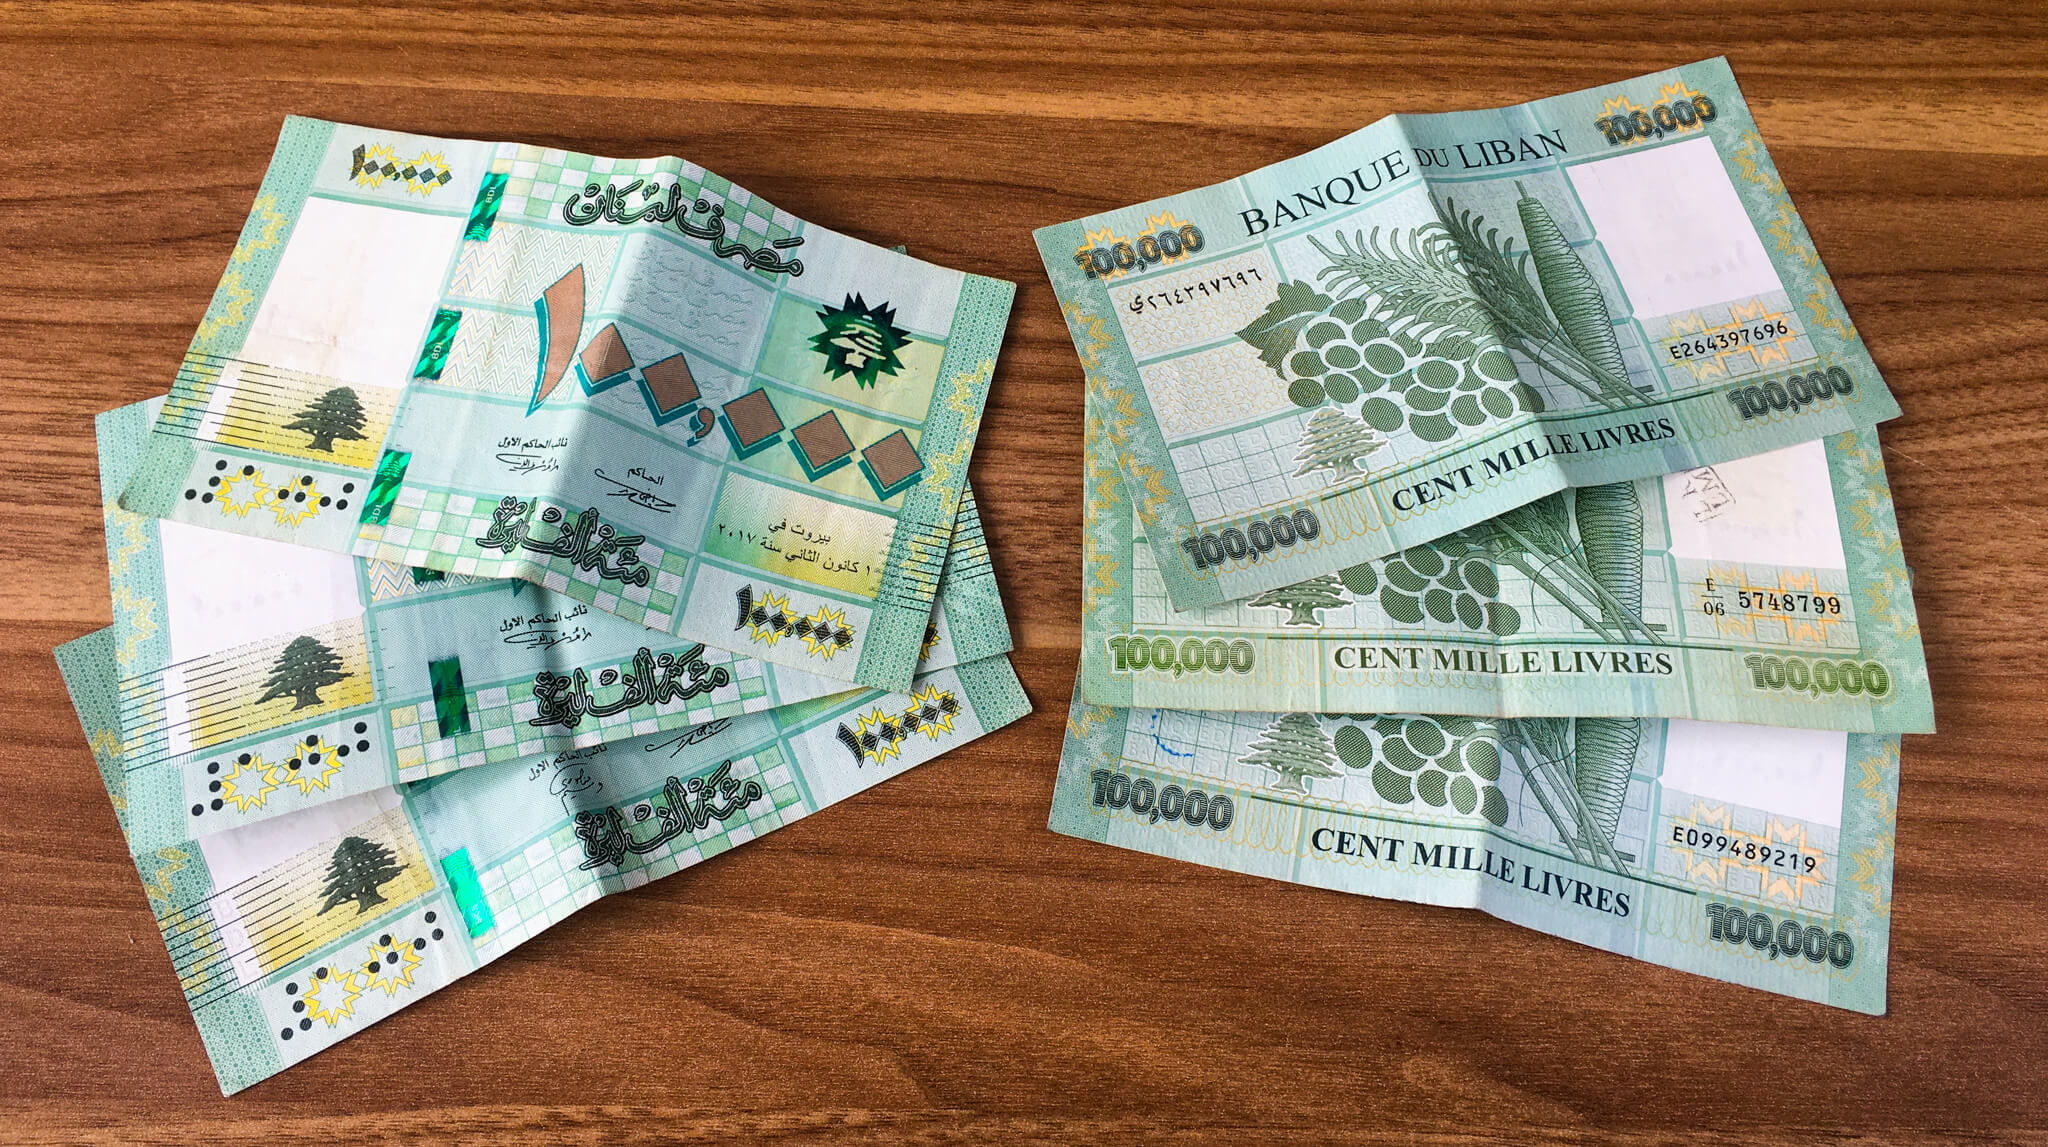 A picture of six 100,000 LBP notes